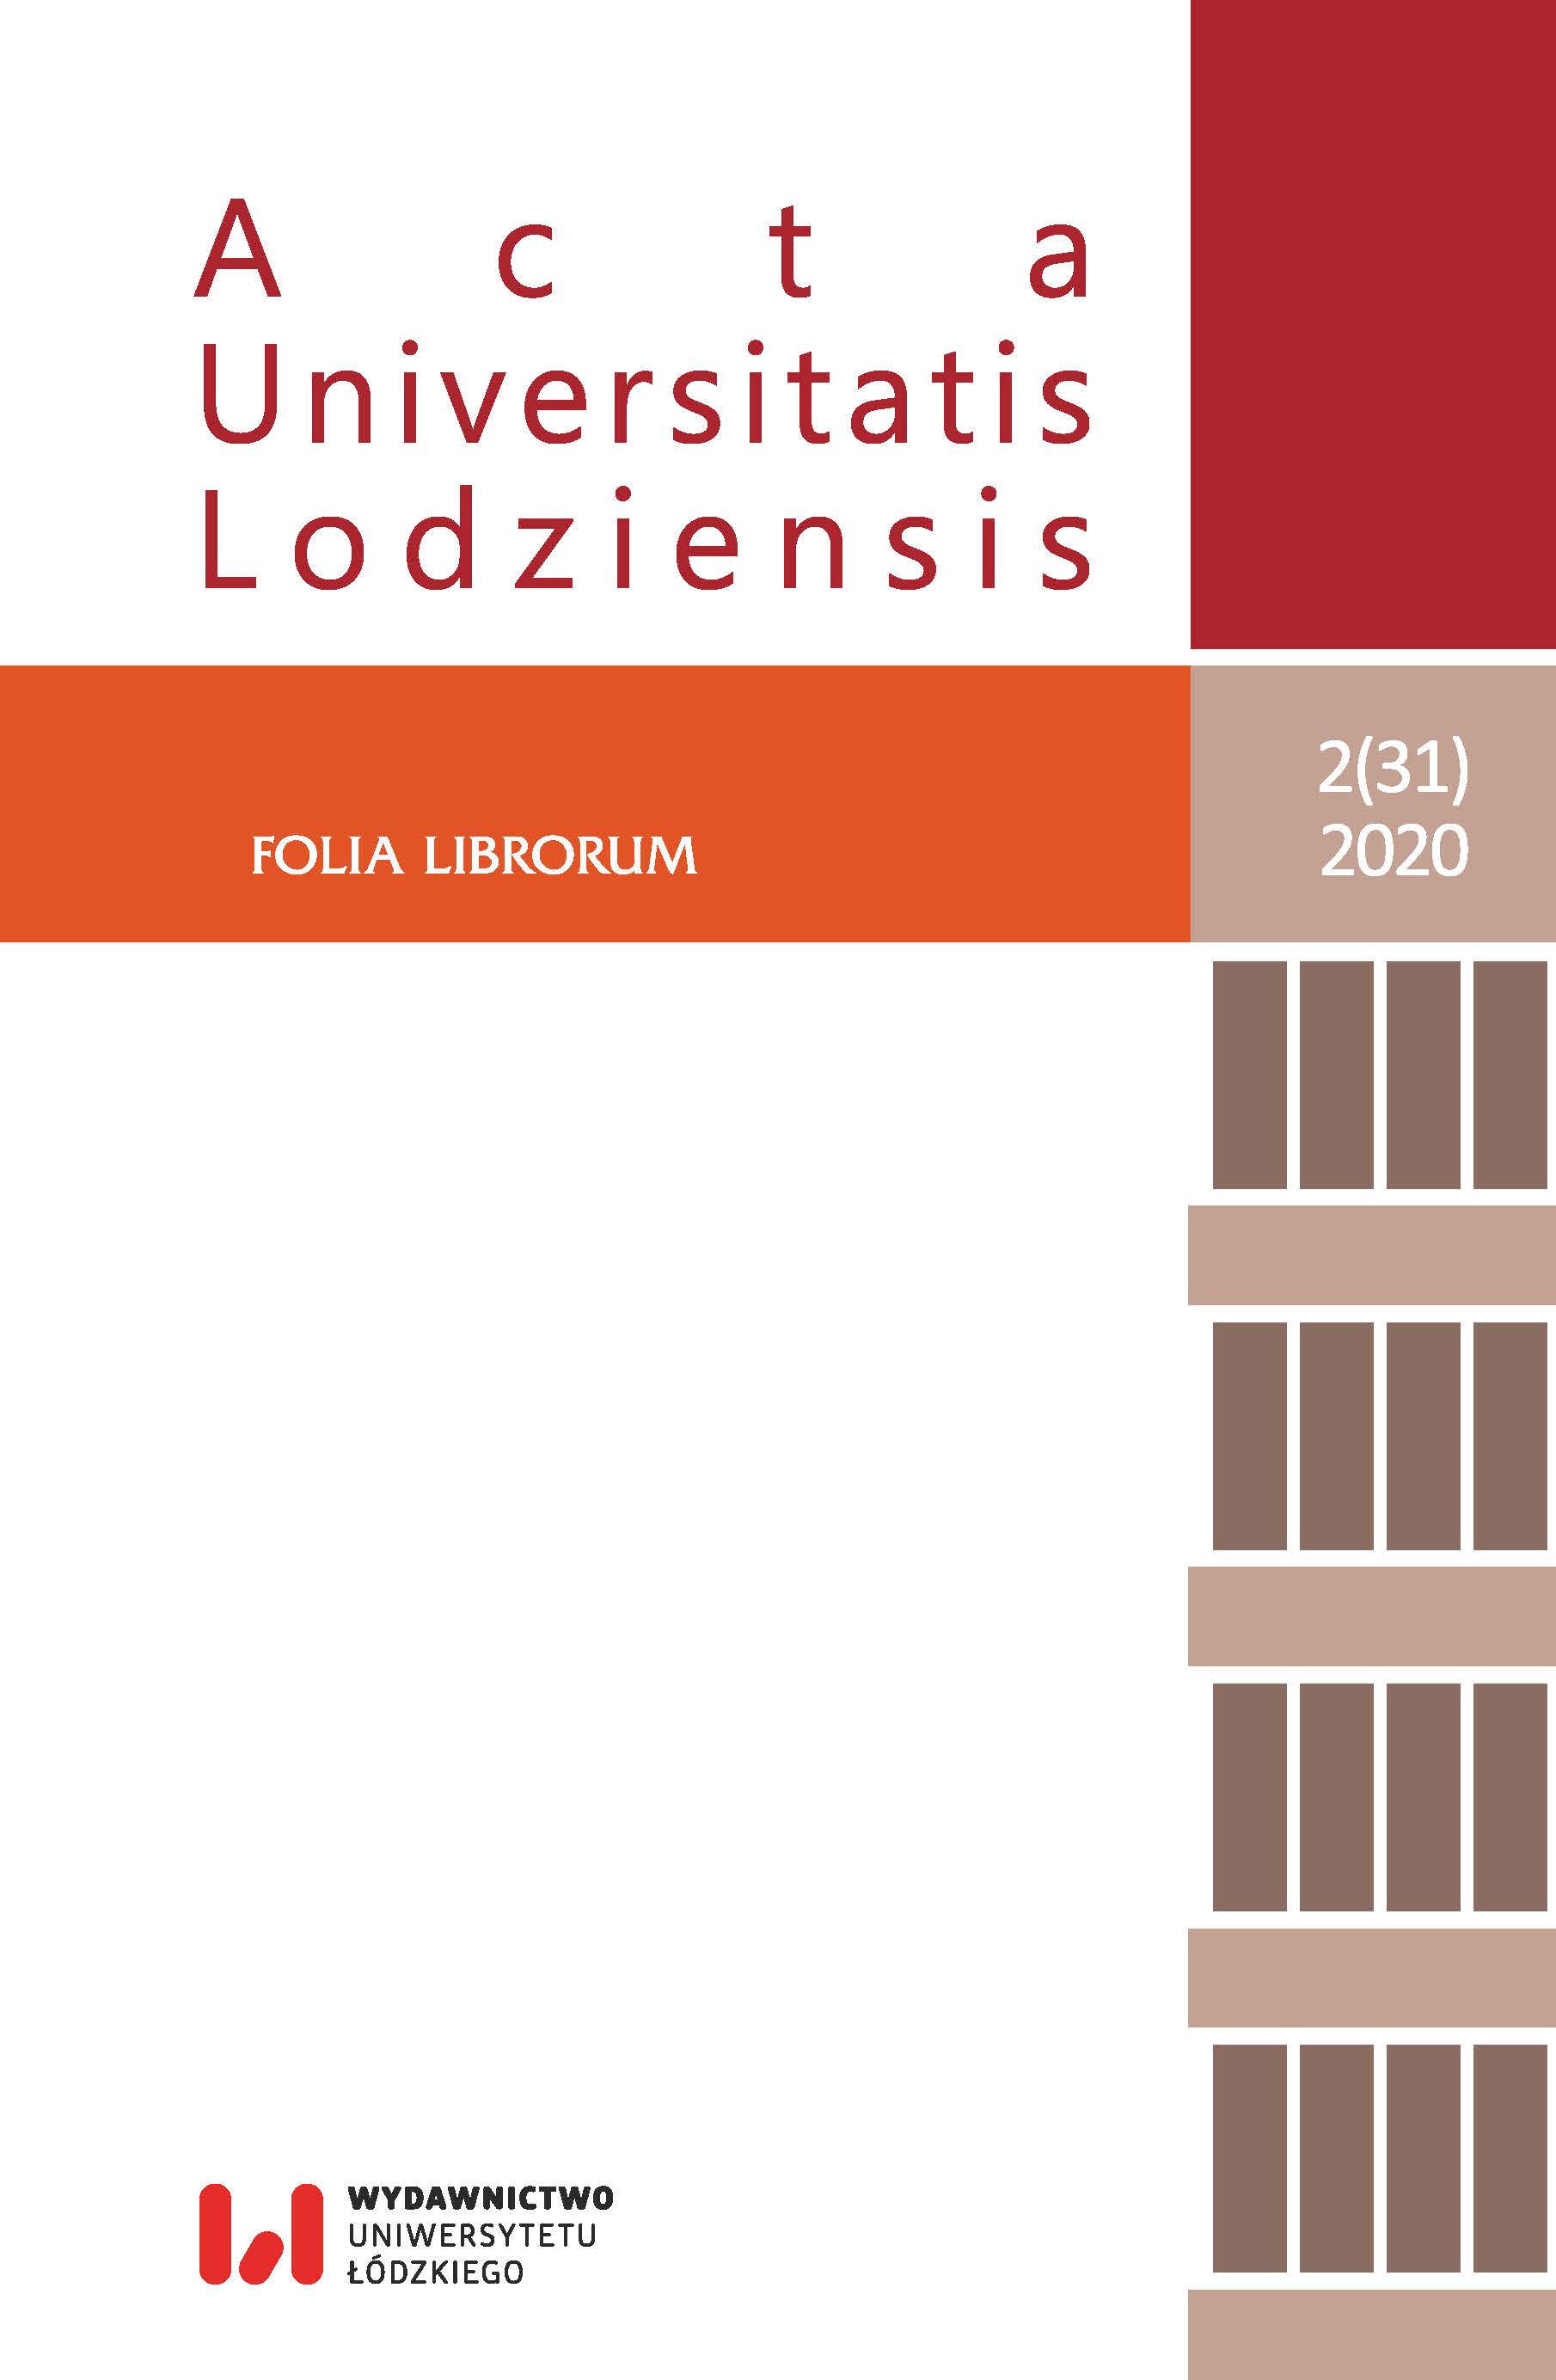 Lodz University Library in the professional and scientific work of Professor Hanna Tadeusiewicz Cover Image